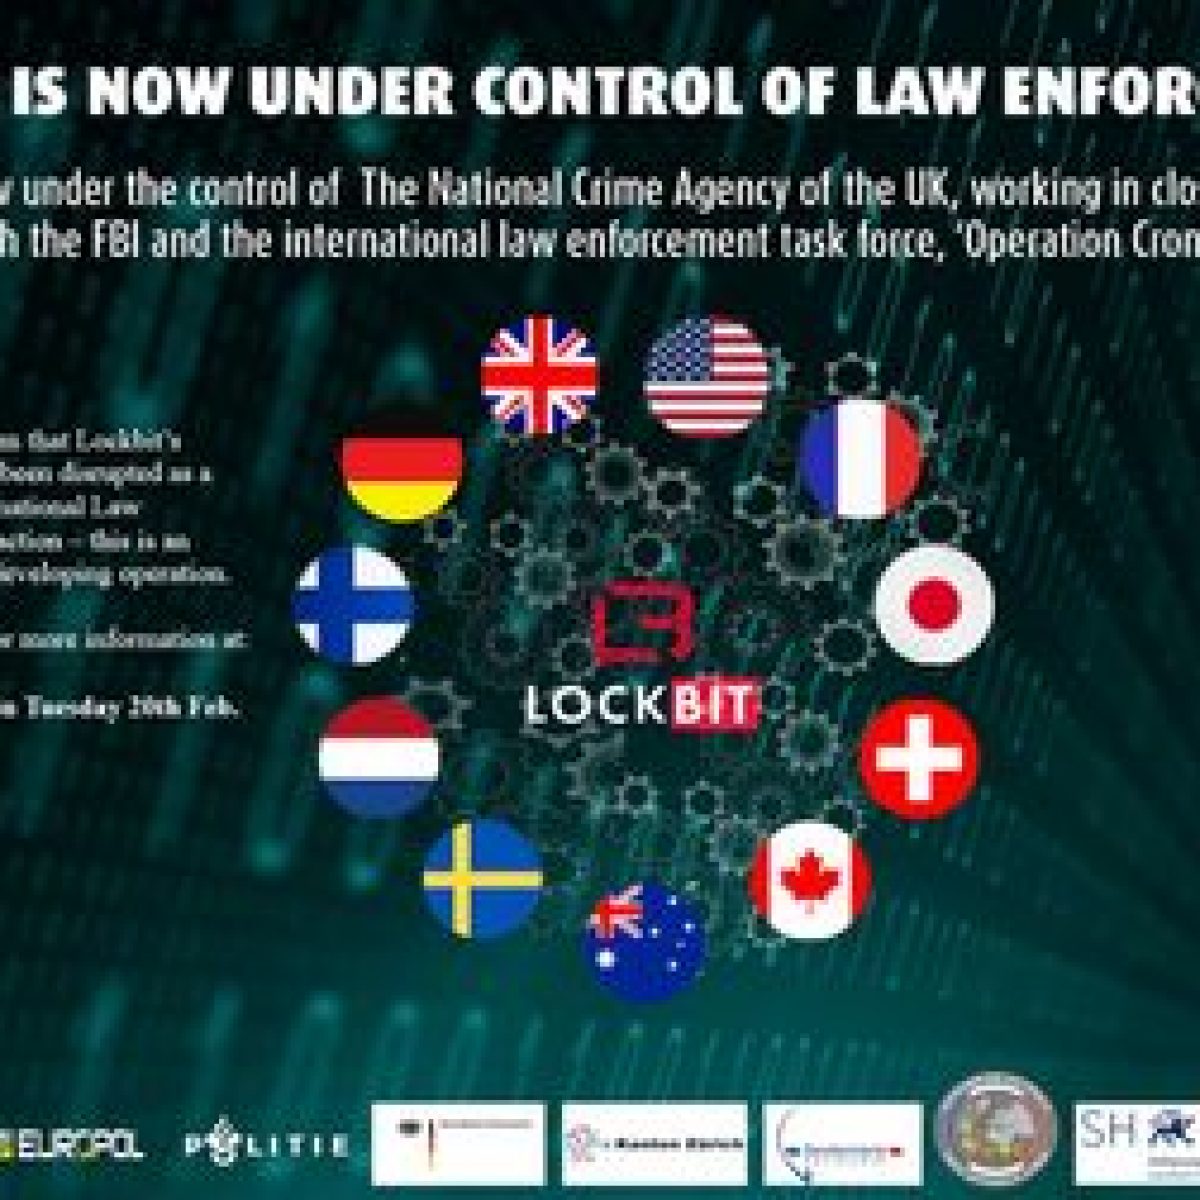 Lockbit cybercrime gang disrupted by Britain, US and EU